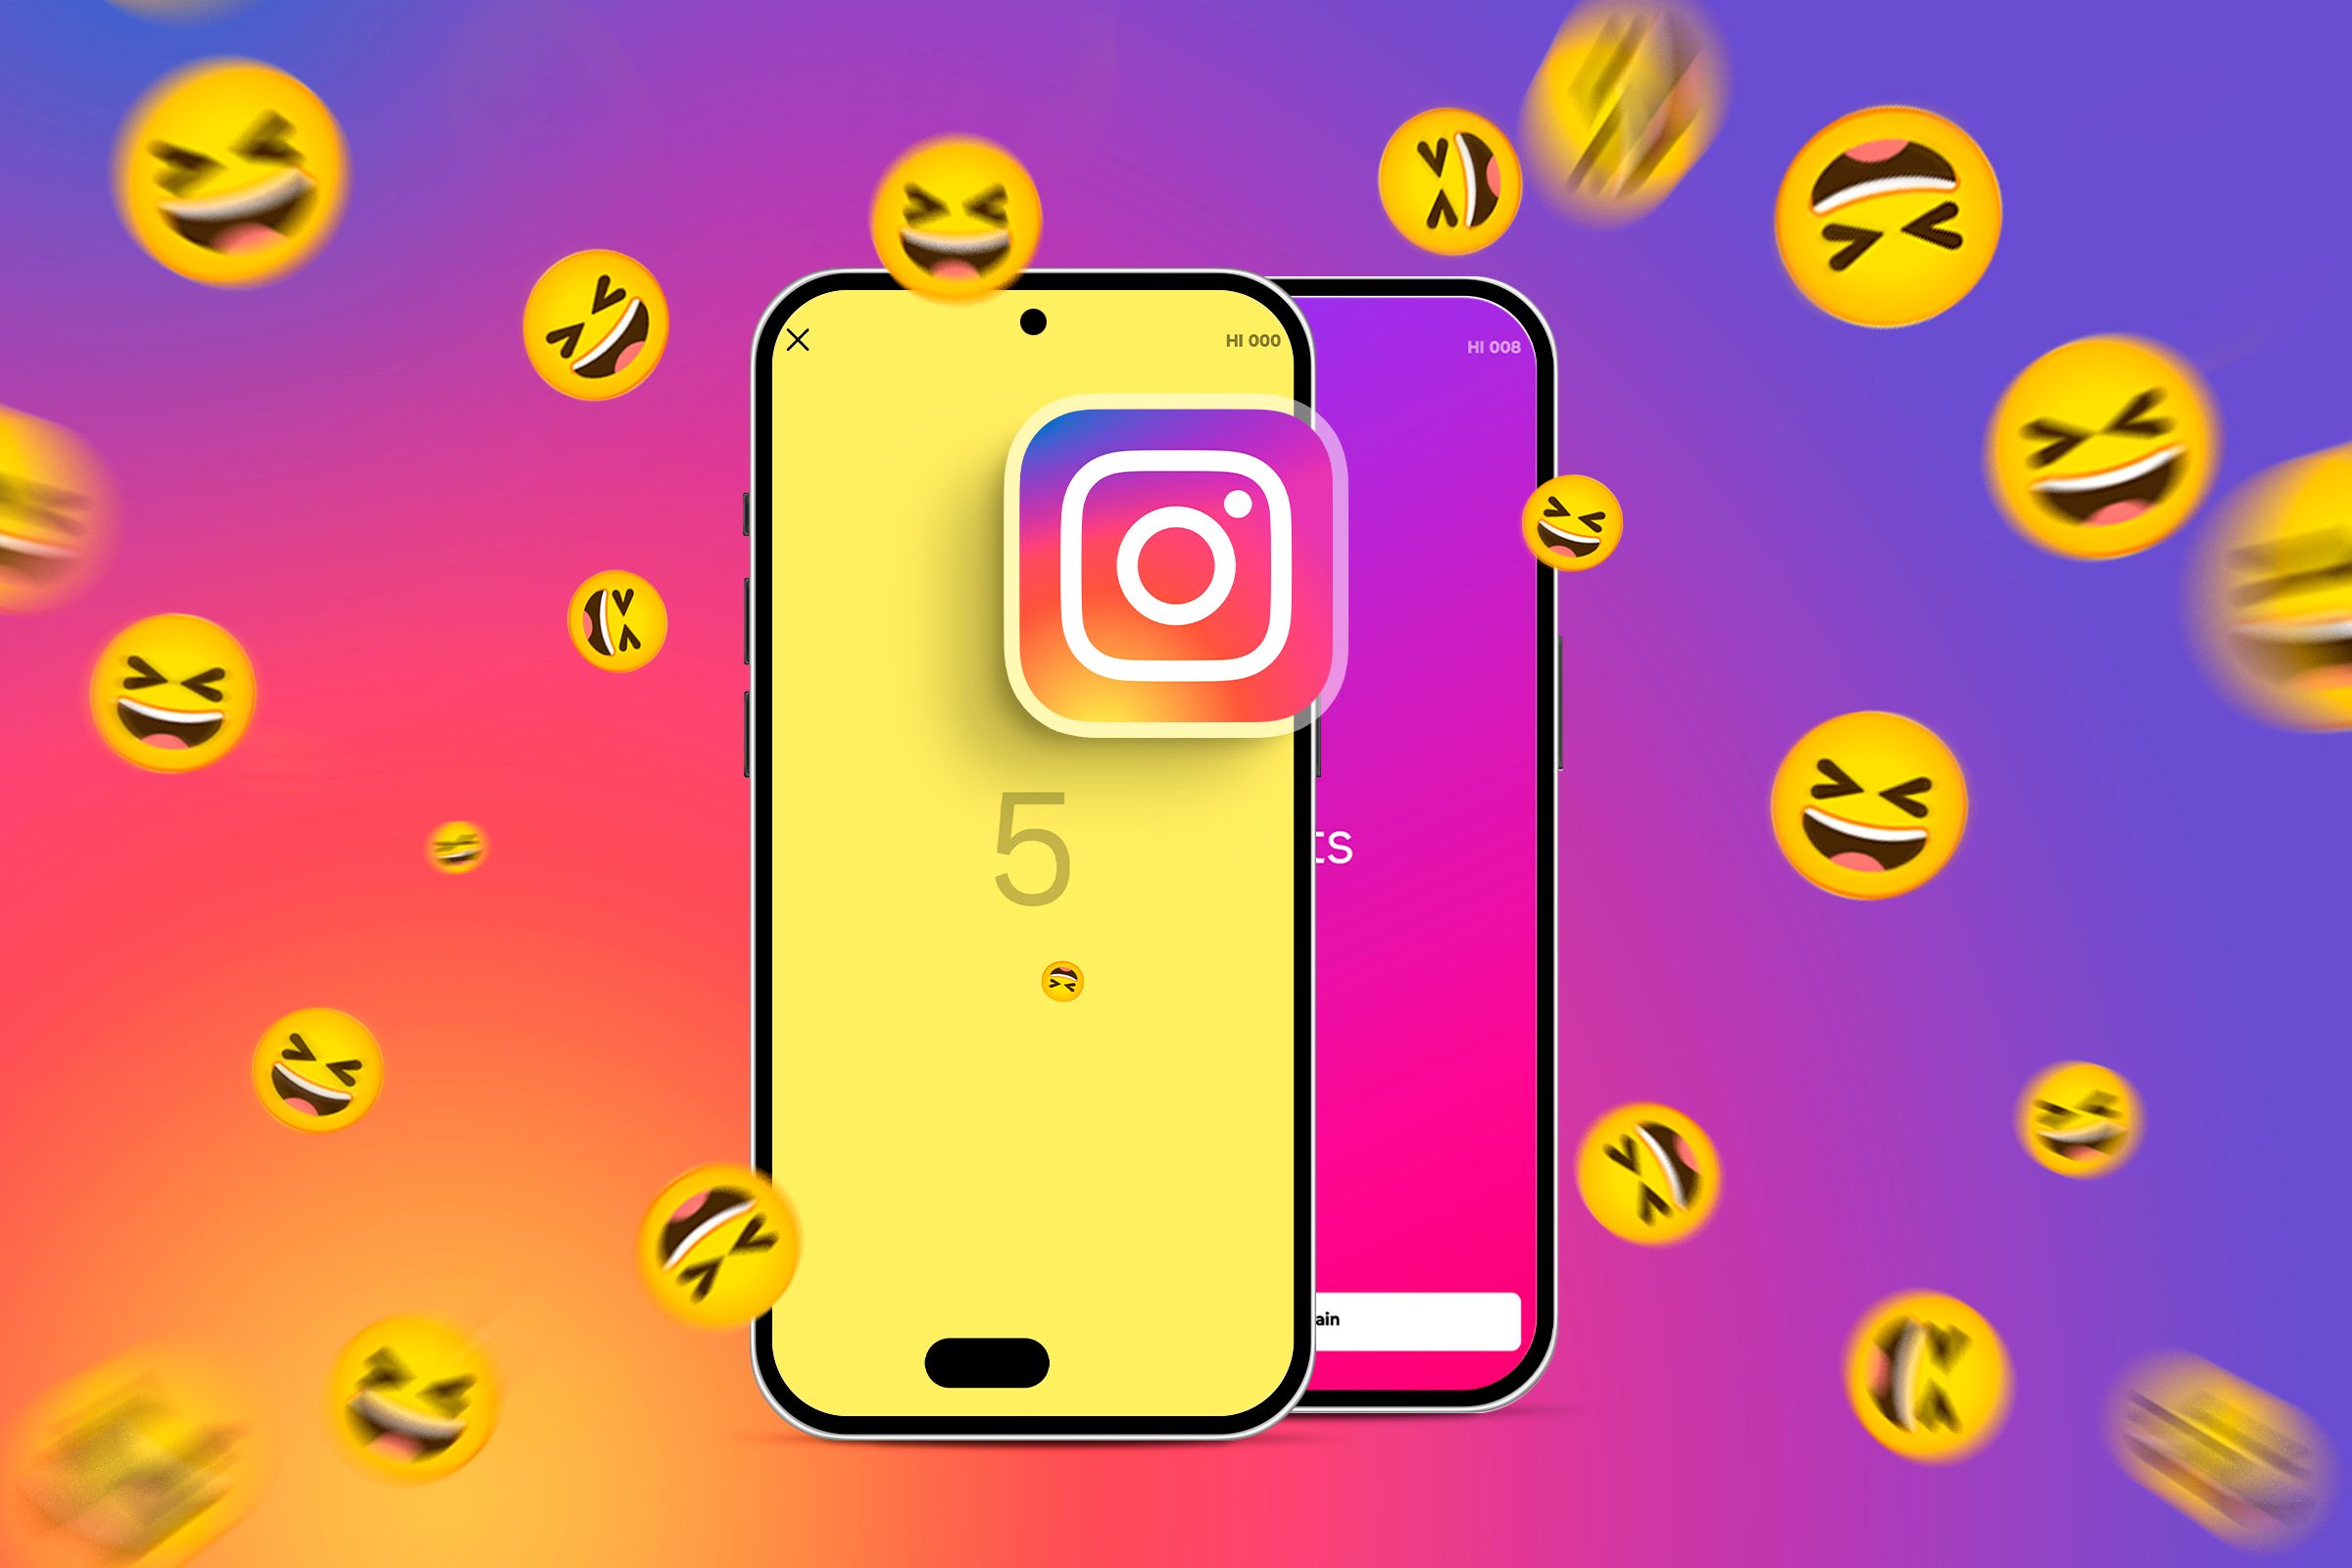 Two smartphones showing the Instagram emoji game and several emojis around.